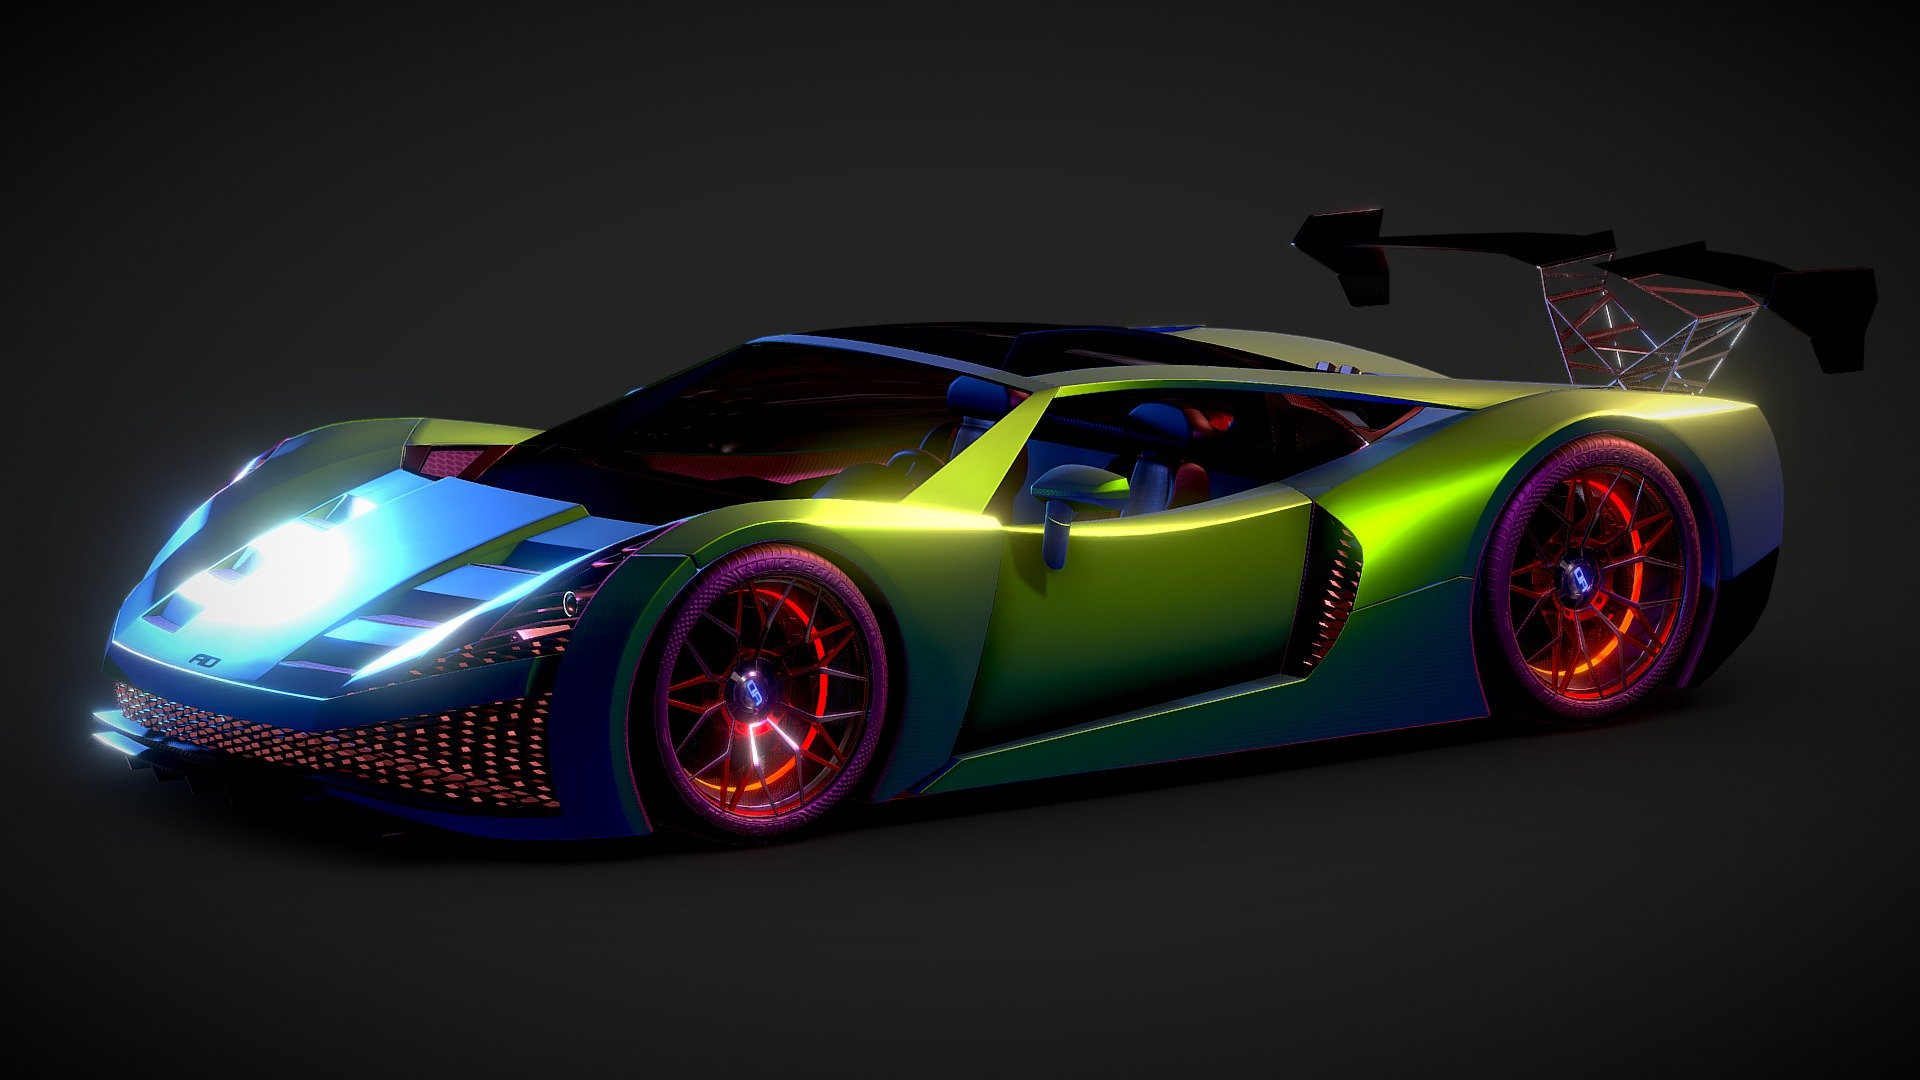 This is my custom concept, it has several different supercar instincts, but totally, original and one of its kind, presenting to you the Hyperconcept.
Check out renders - https://youtu.be/O31RXr-vTCw - Hyperconcept - Download Free 3D model by Allay Design (@Alister.Dsa) 3d model